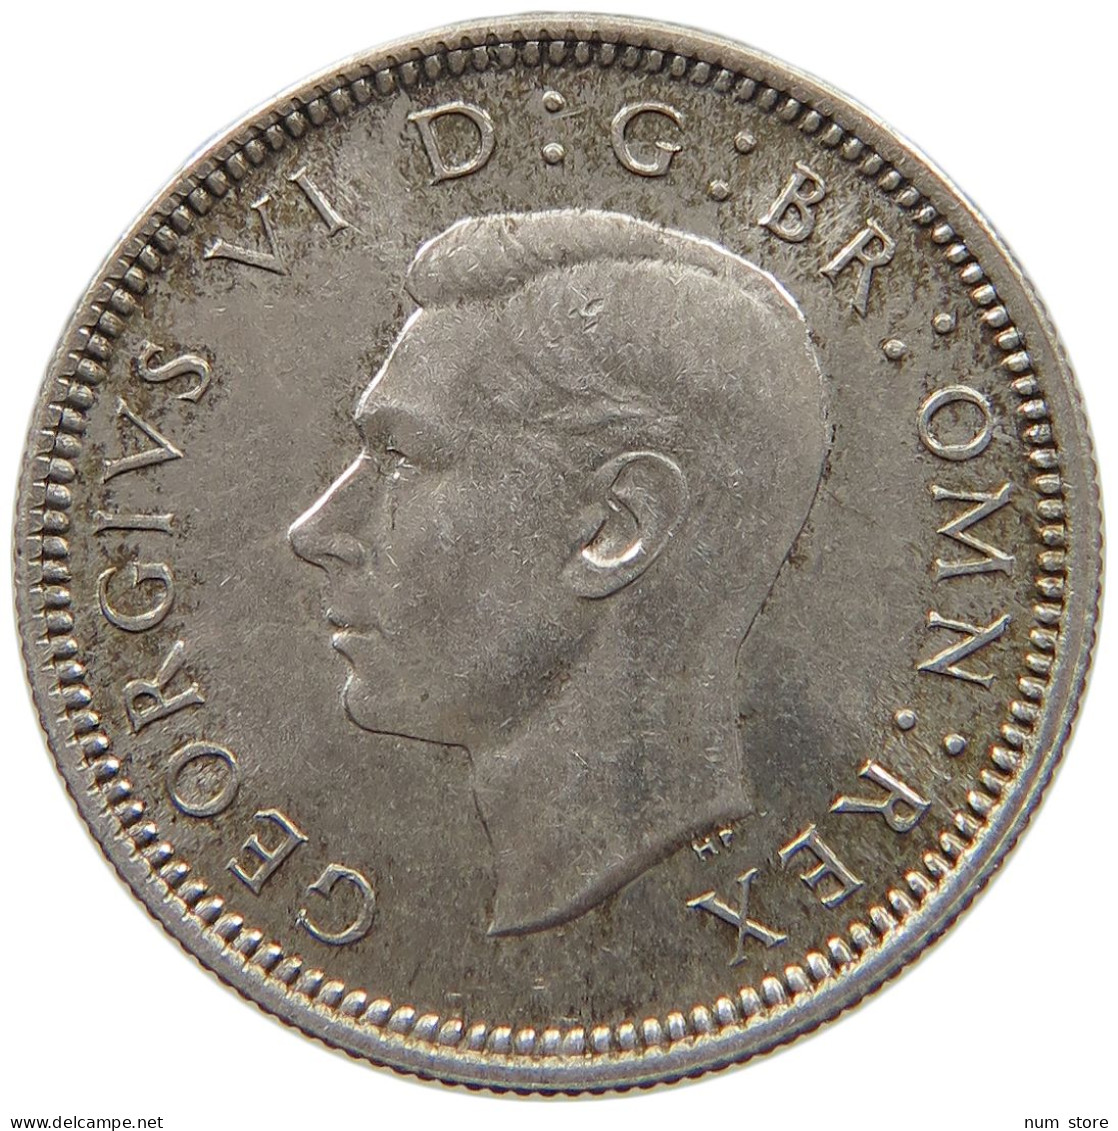 GREAT BRITAIN SIXPENCE 1937 George VI. (1936-1952) #c002 0107 - H. 6 Pence